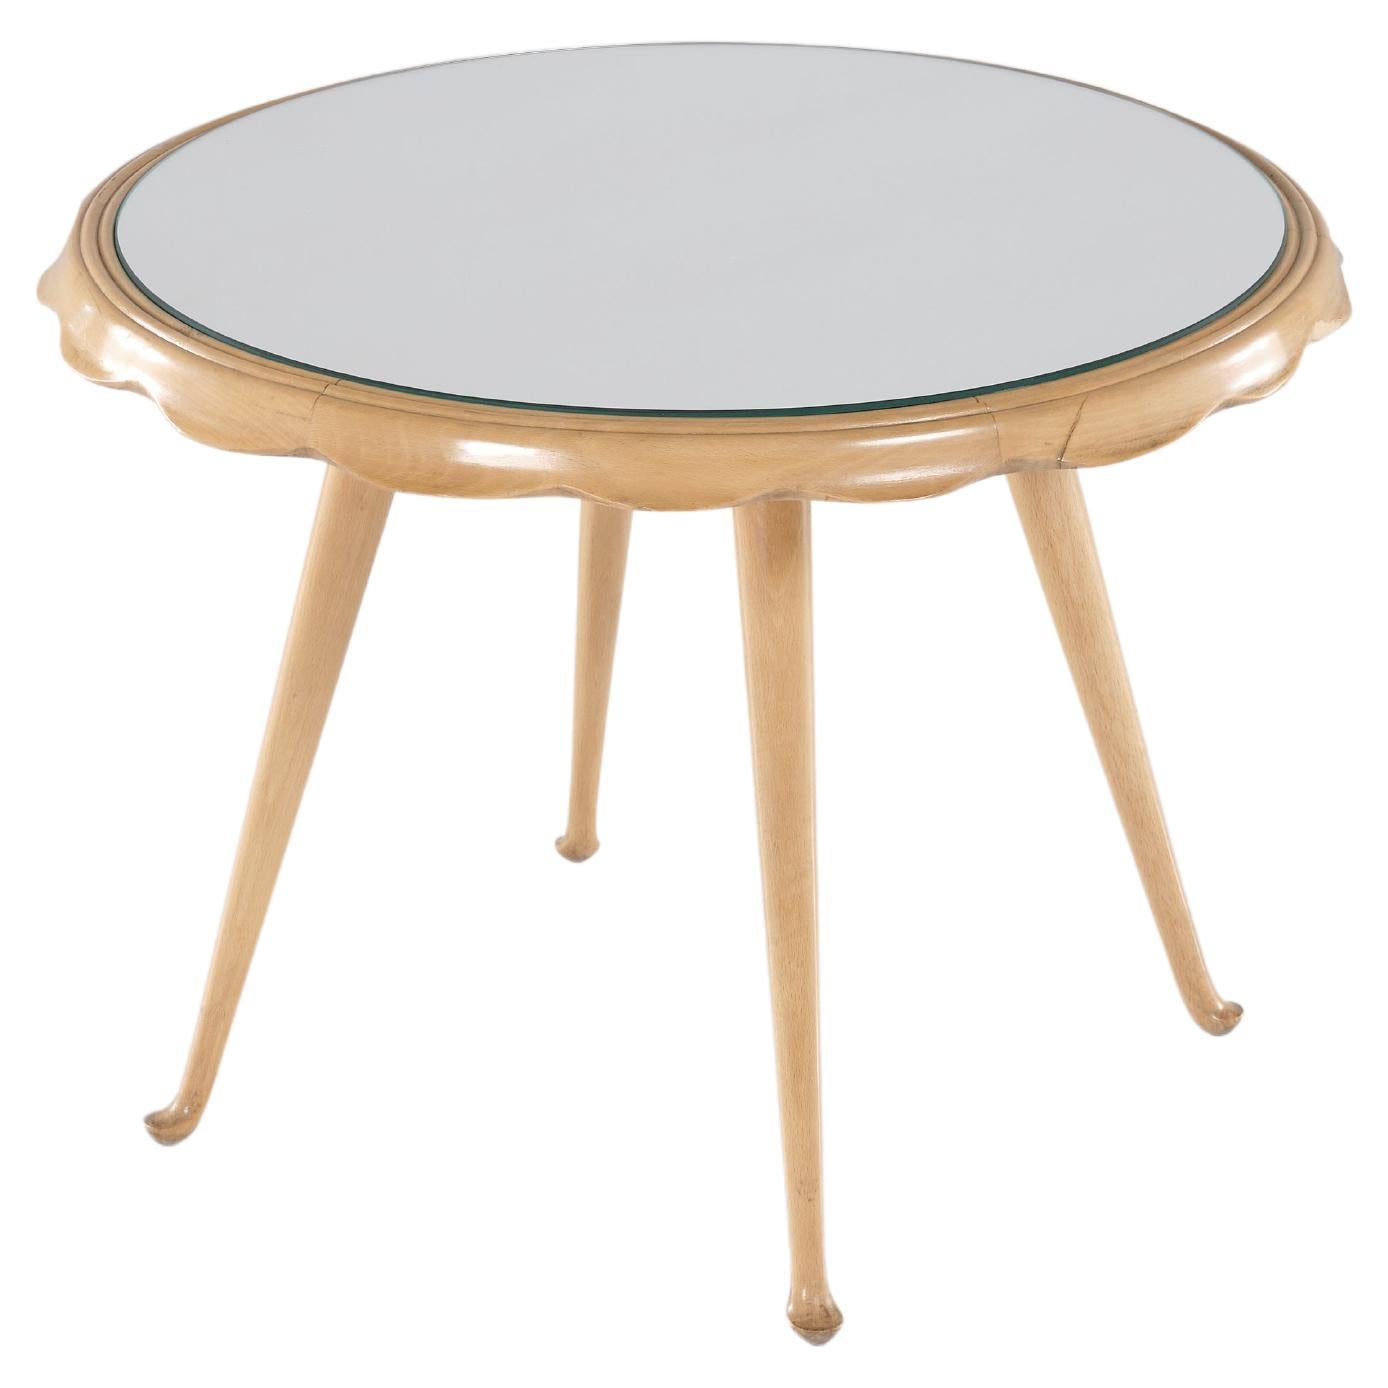 One Wood and Mirrored Glass Low Table, Italian Design, 1950 circa